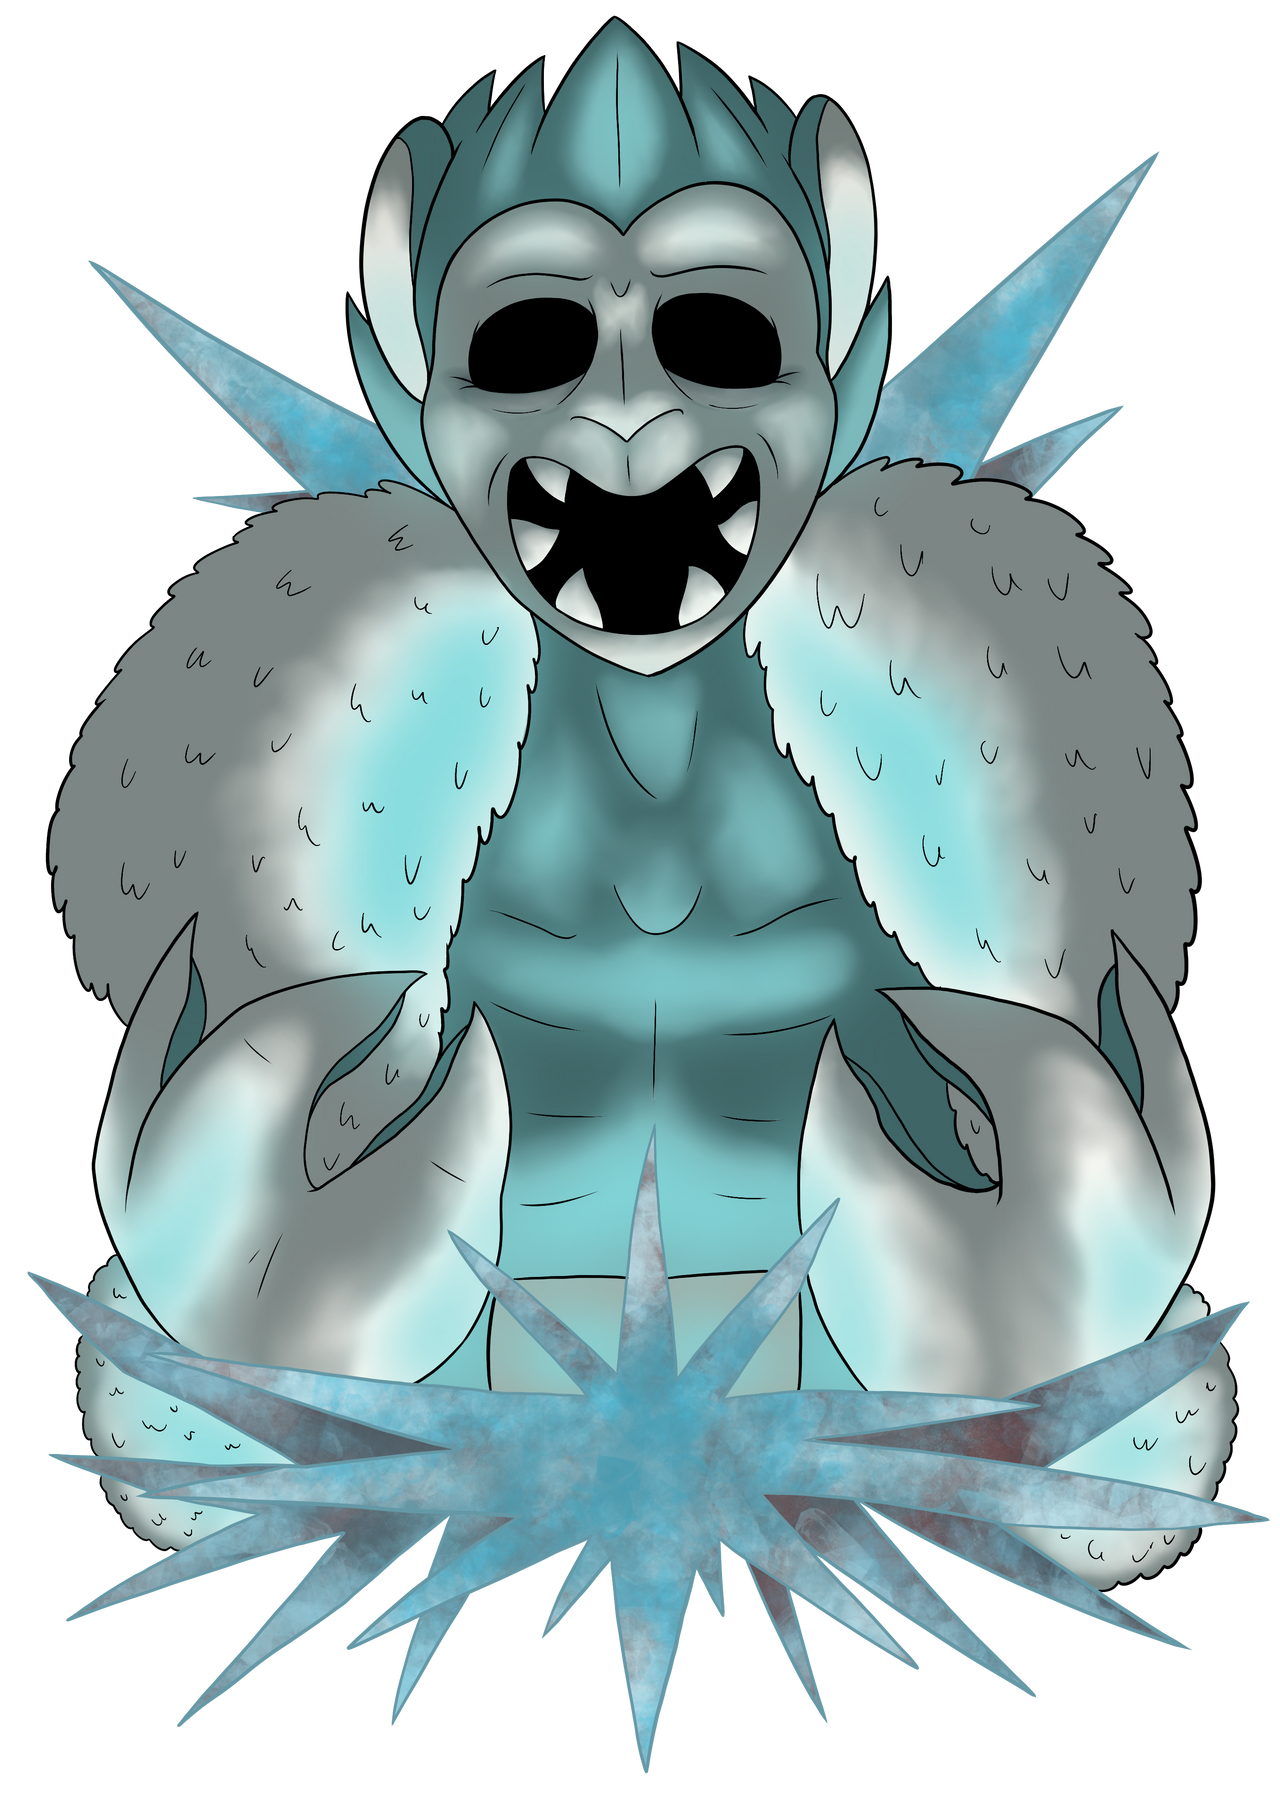 Yeti tubby paint x by delm38946 on DeviantArt